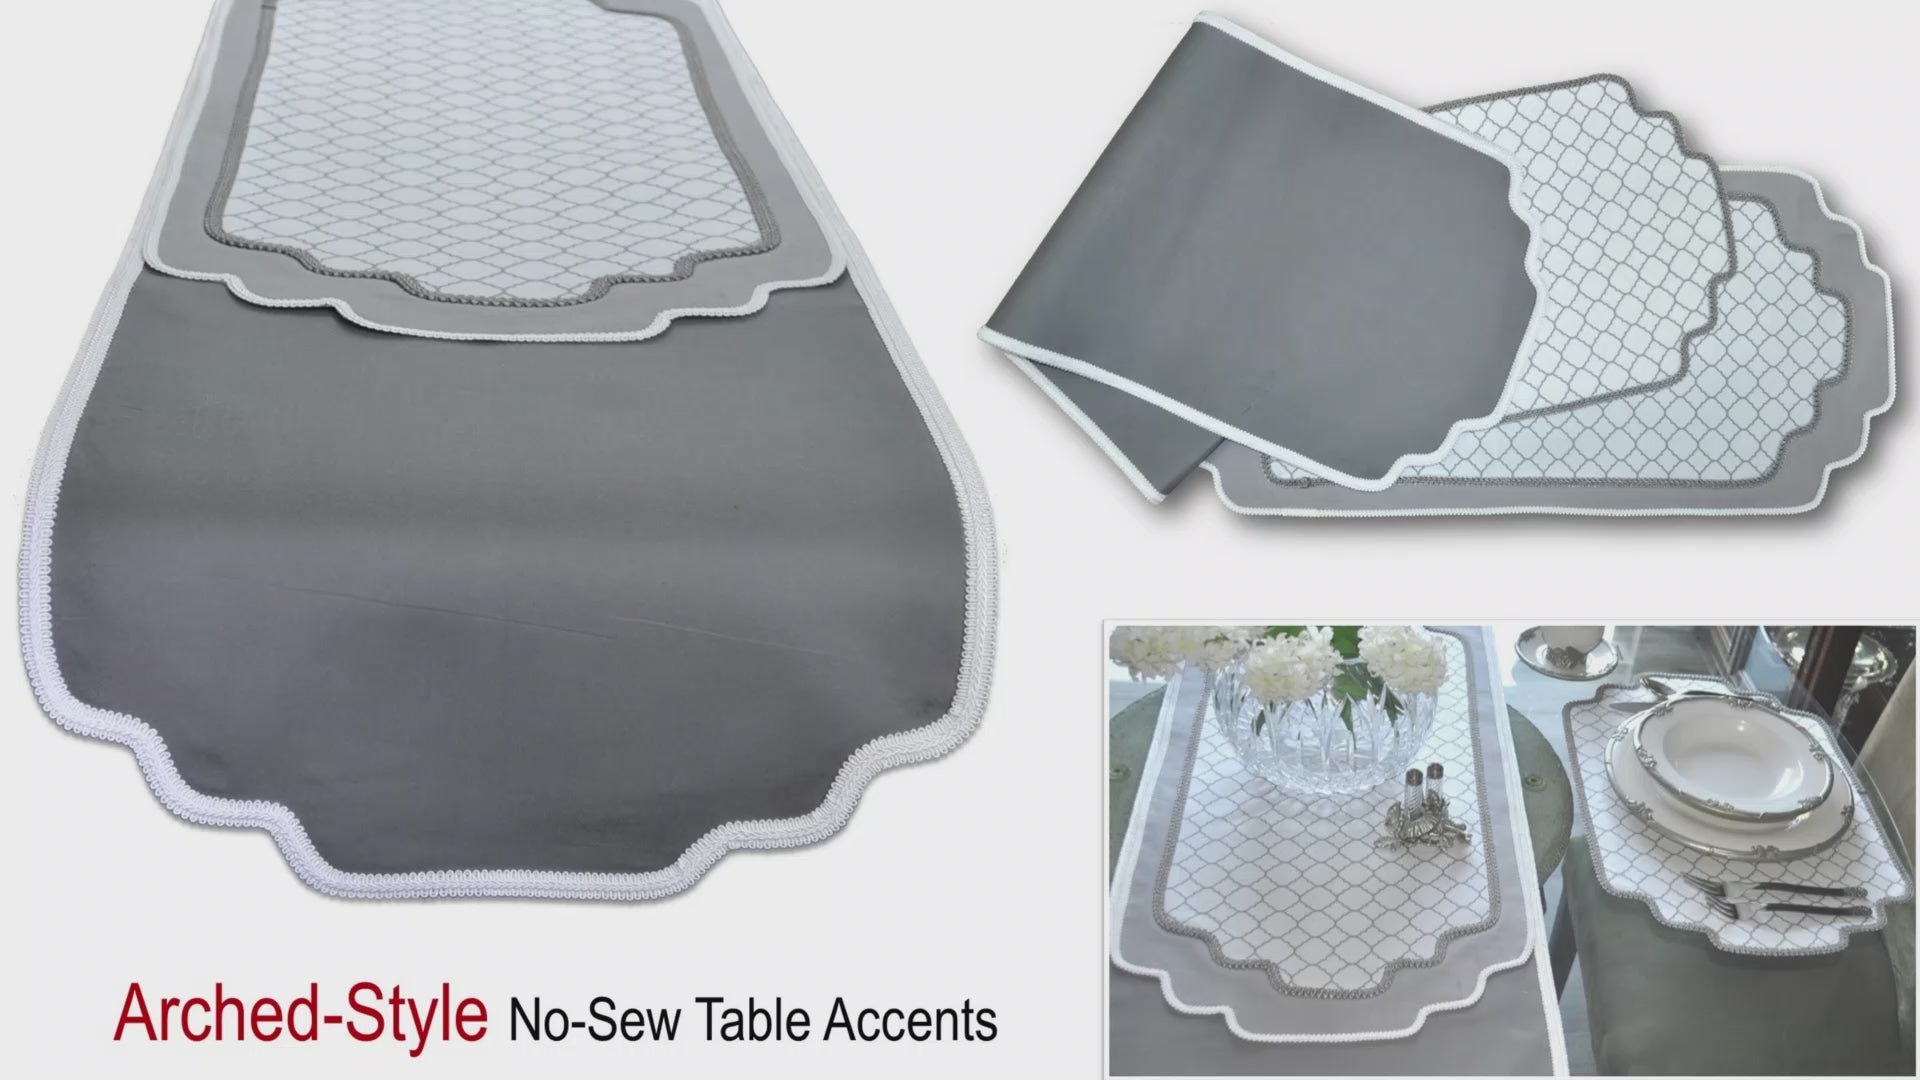 Traceable Designer DIY multi-style table decorating kit, make no-sew table runners, placemats and dresser scarves. Designed by Linda Schurr